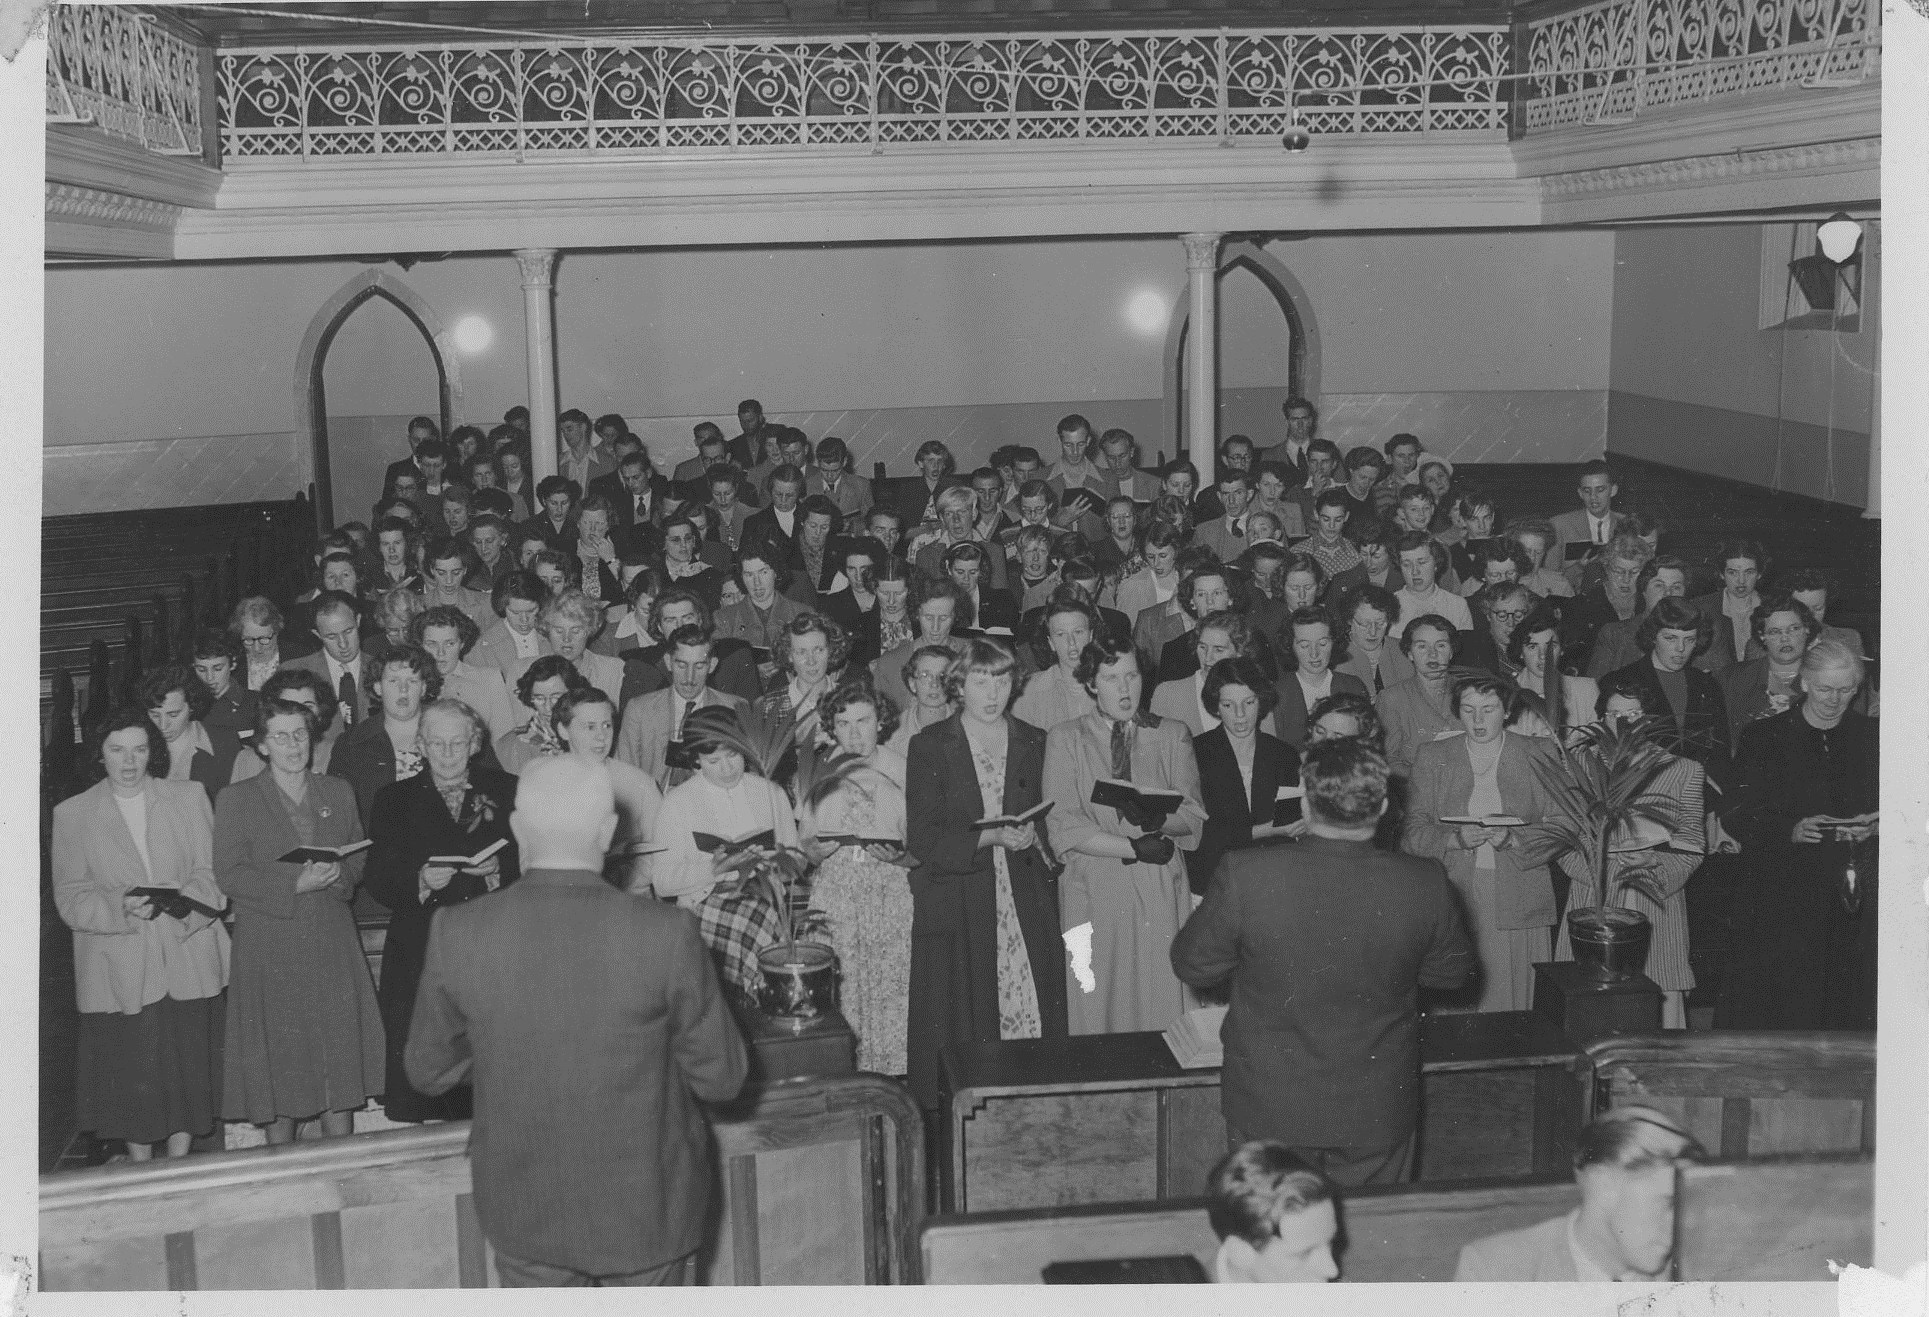 MaughanChurchOldChurchServicebefore1964